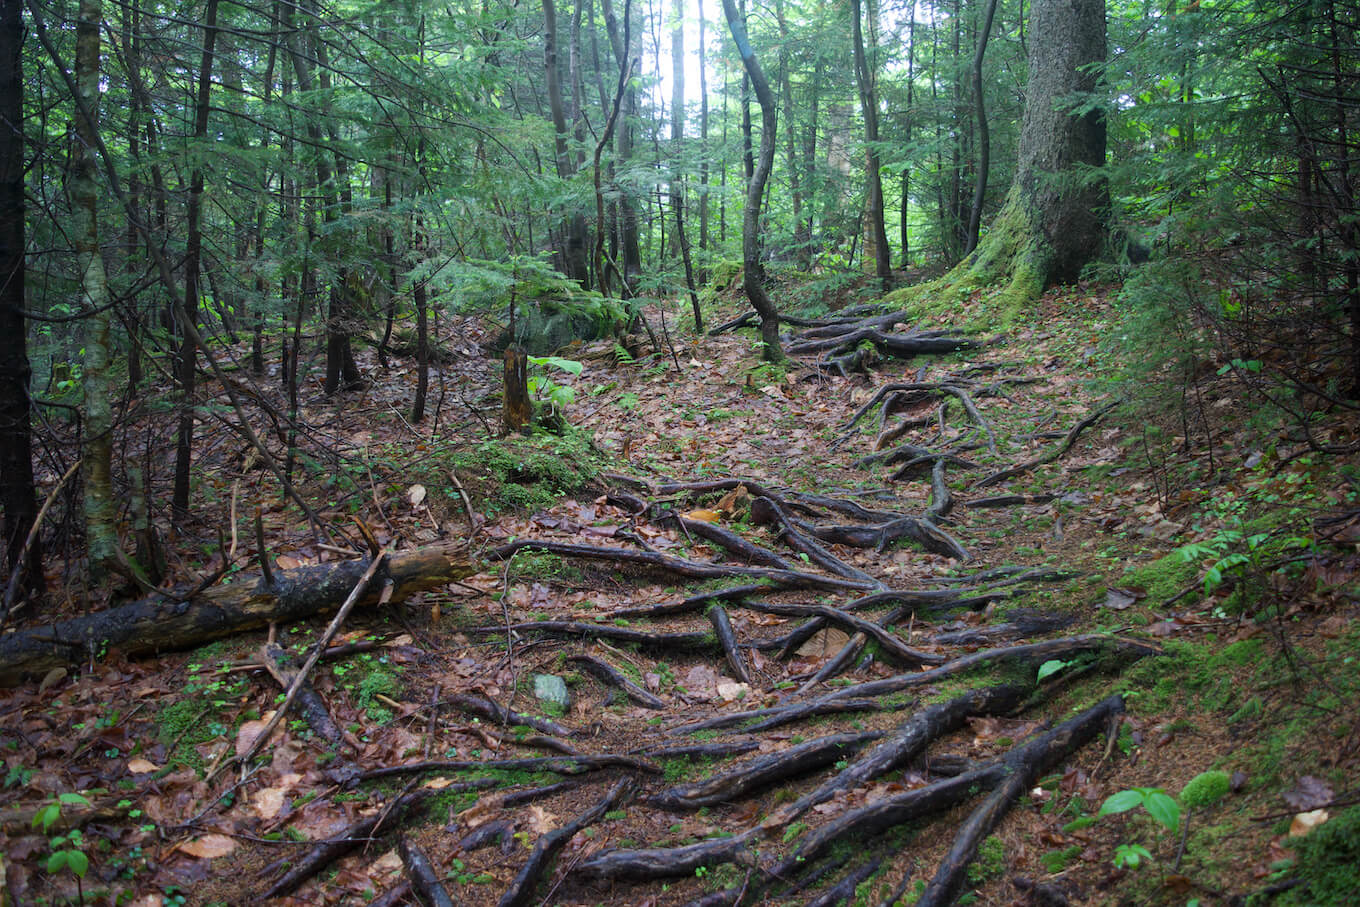 A trail covered with roots demonstrates how important it is to change perspective while taking forest photos.